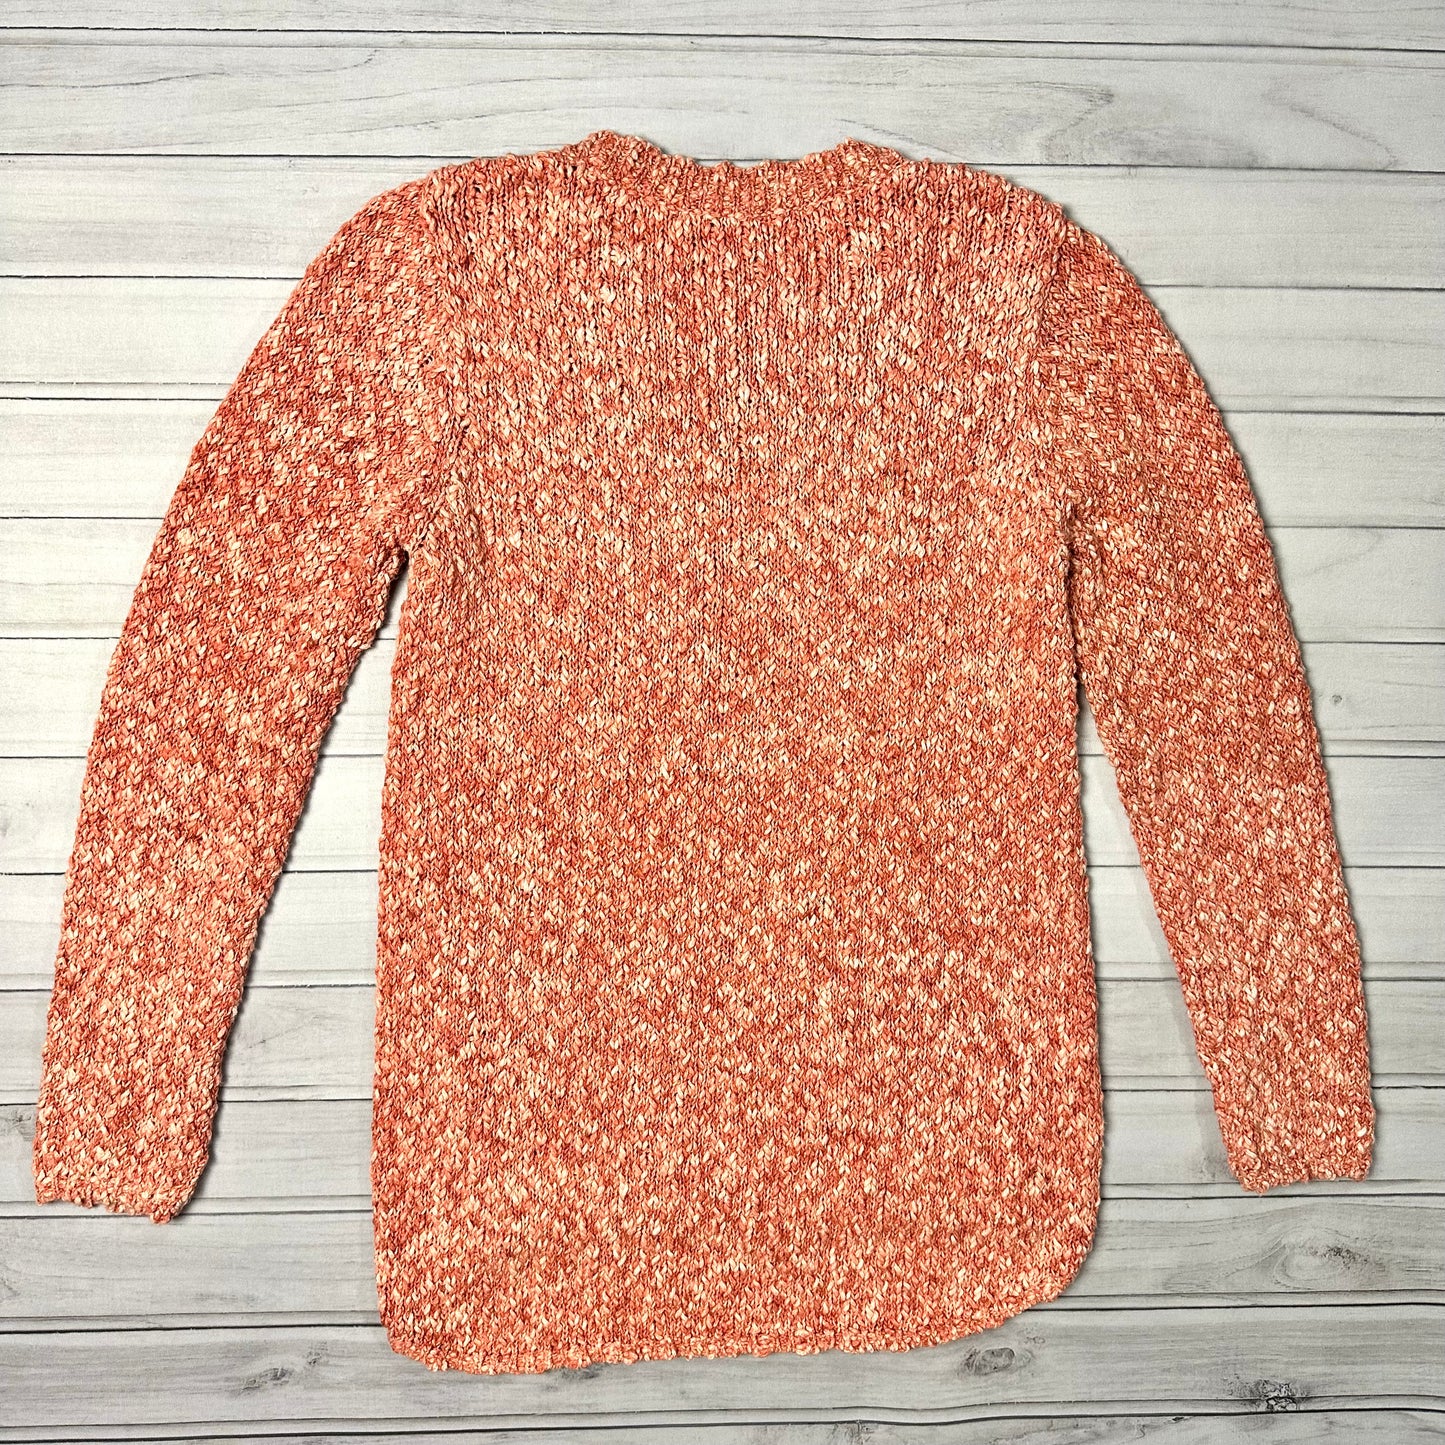 Sweater By J Mclaughlin  Size: M